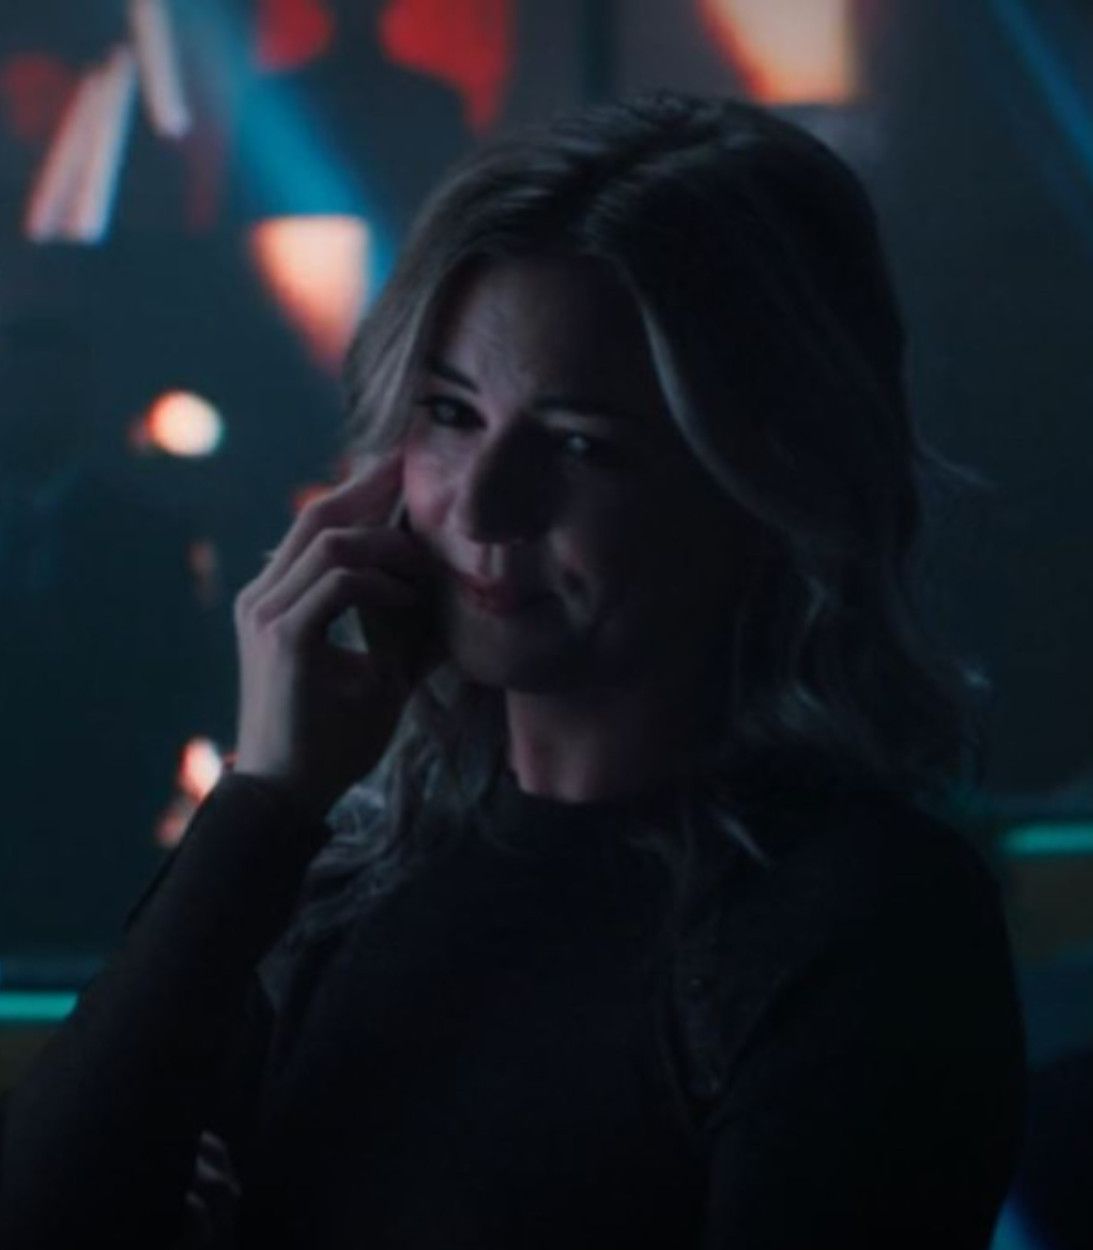 Emily VanCamp as Sharon Carter The Falcon and The Winter Soldier Episode 5 Vertical